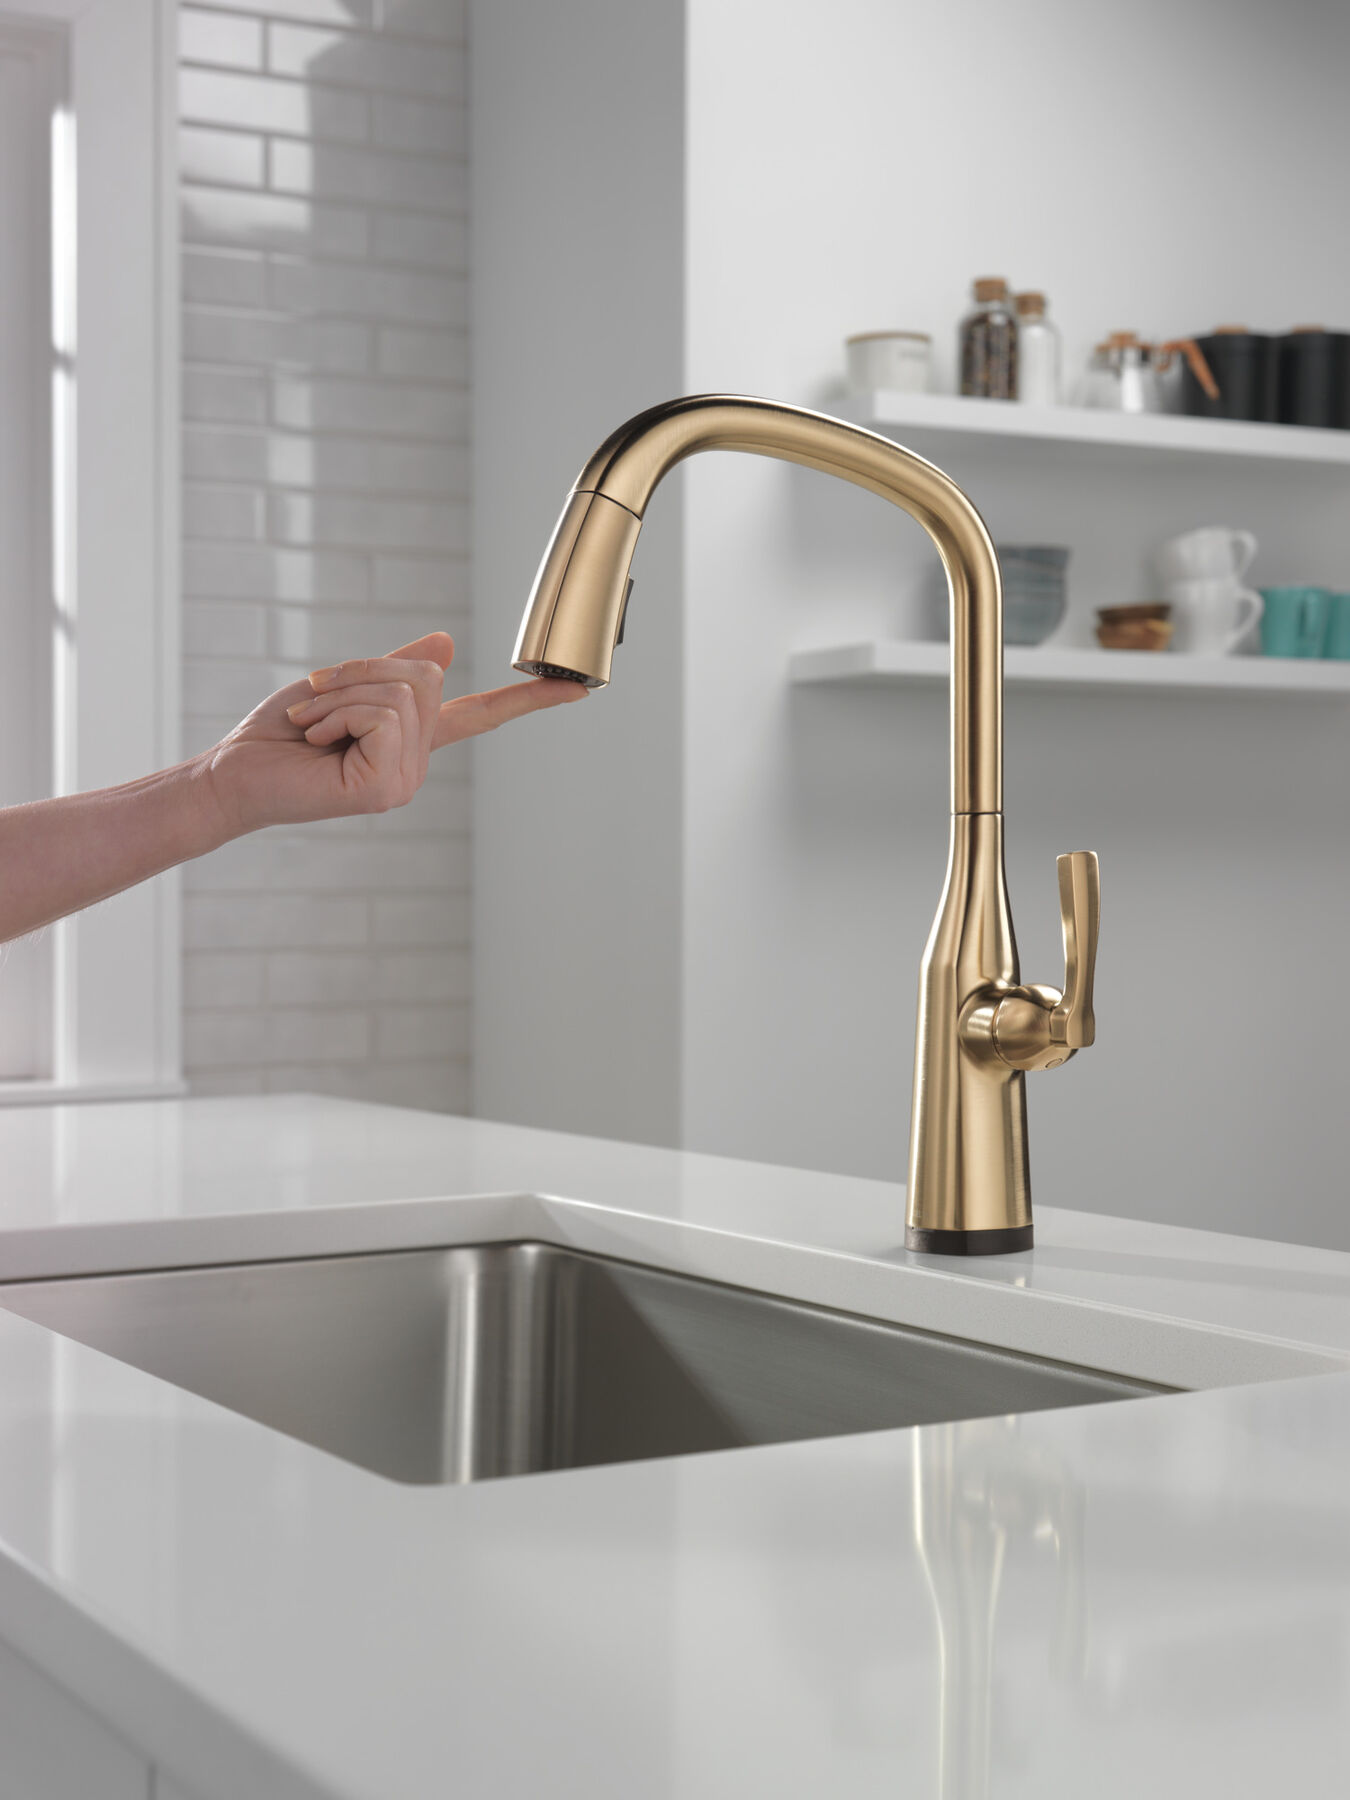 Led Kitchen Sink Faucet with Pull Down Sprayer Brass Single Handle